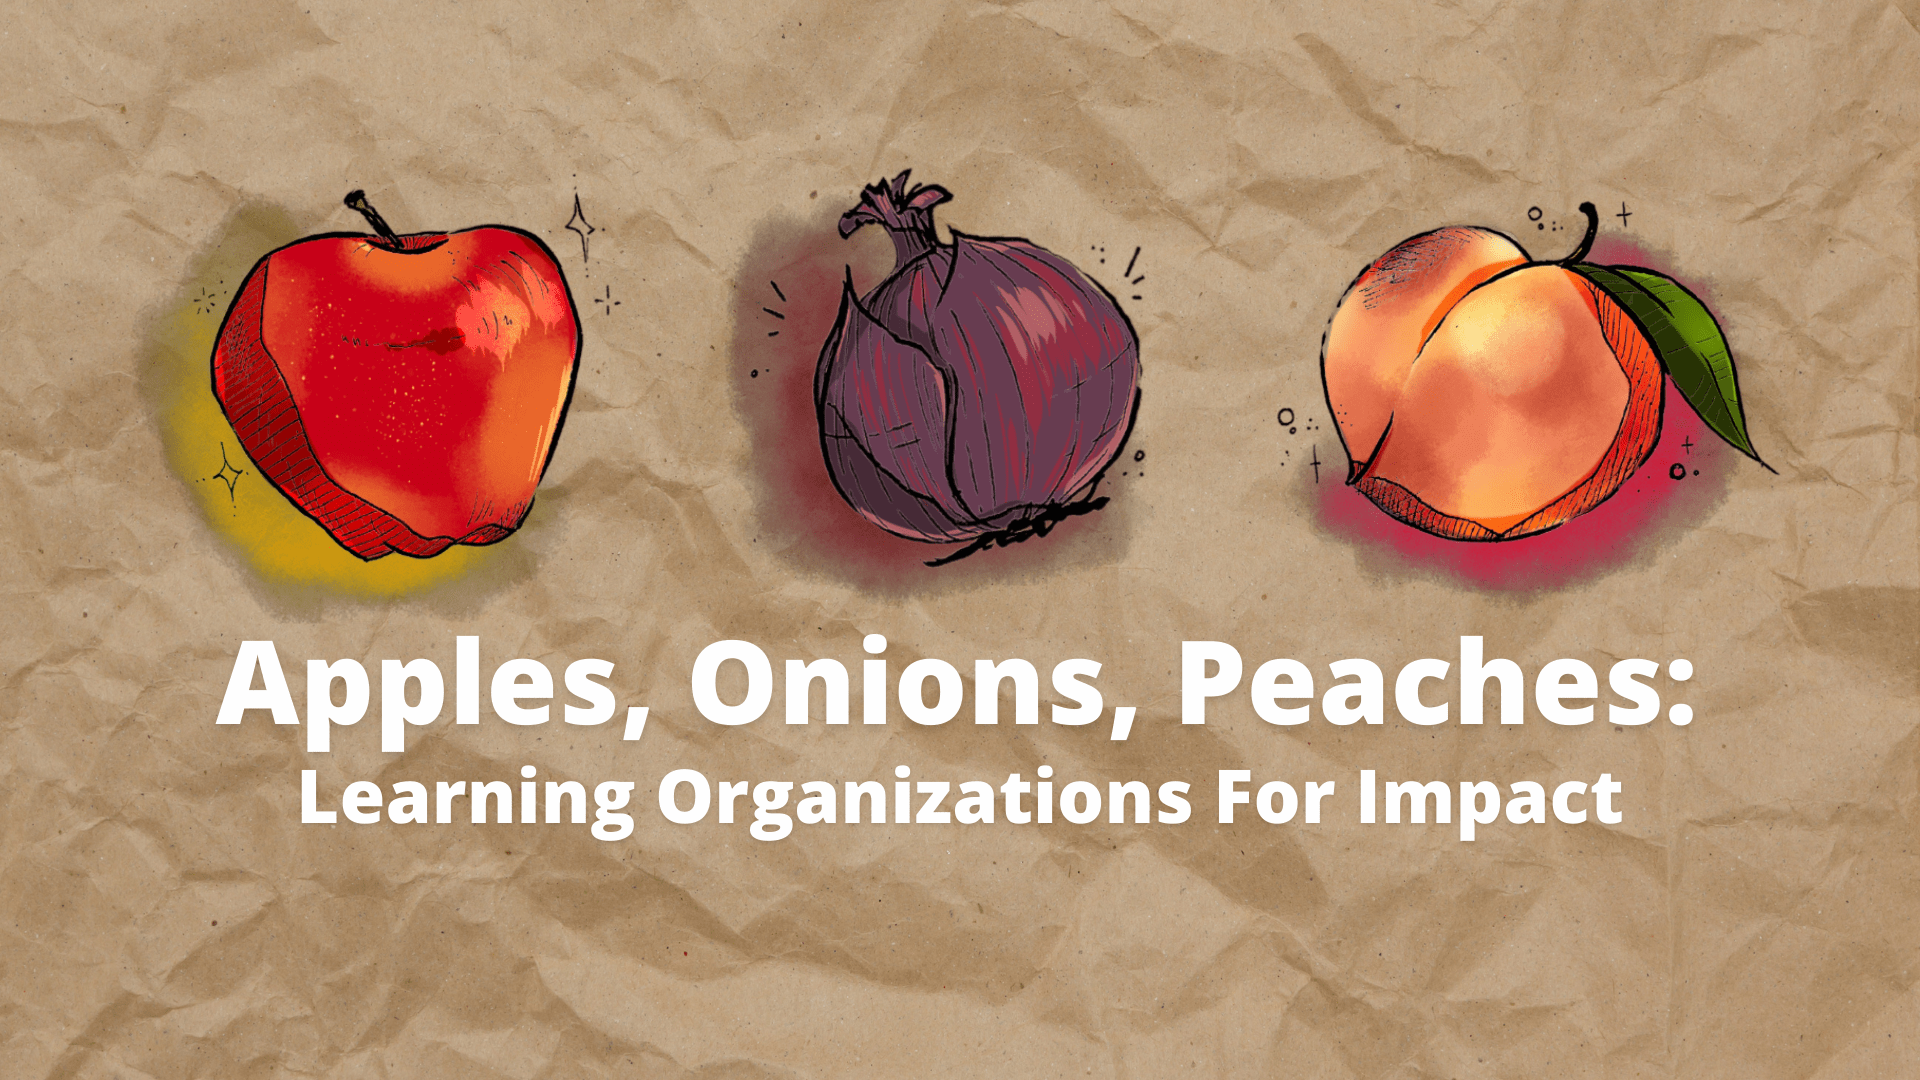 An illustration of an apple, onion, and peach on a textured brown background with the text apples, onions, and peaches: learning organizations for impact.